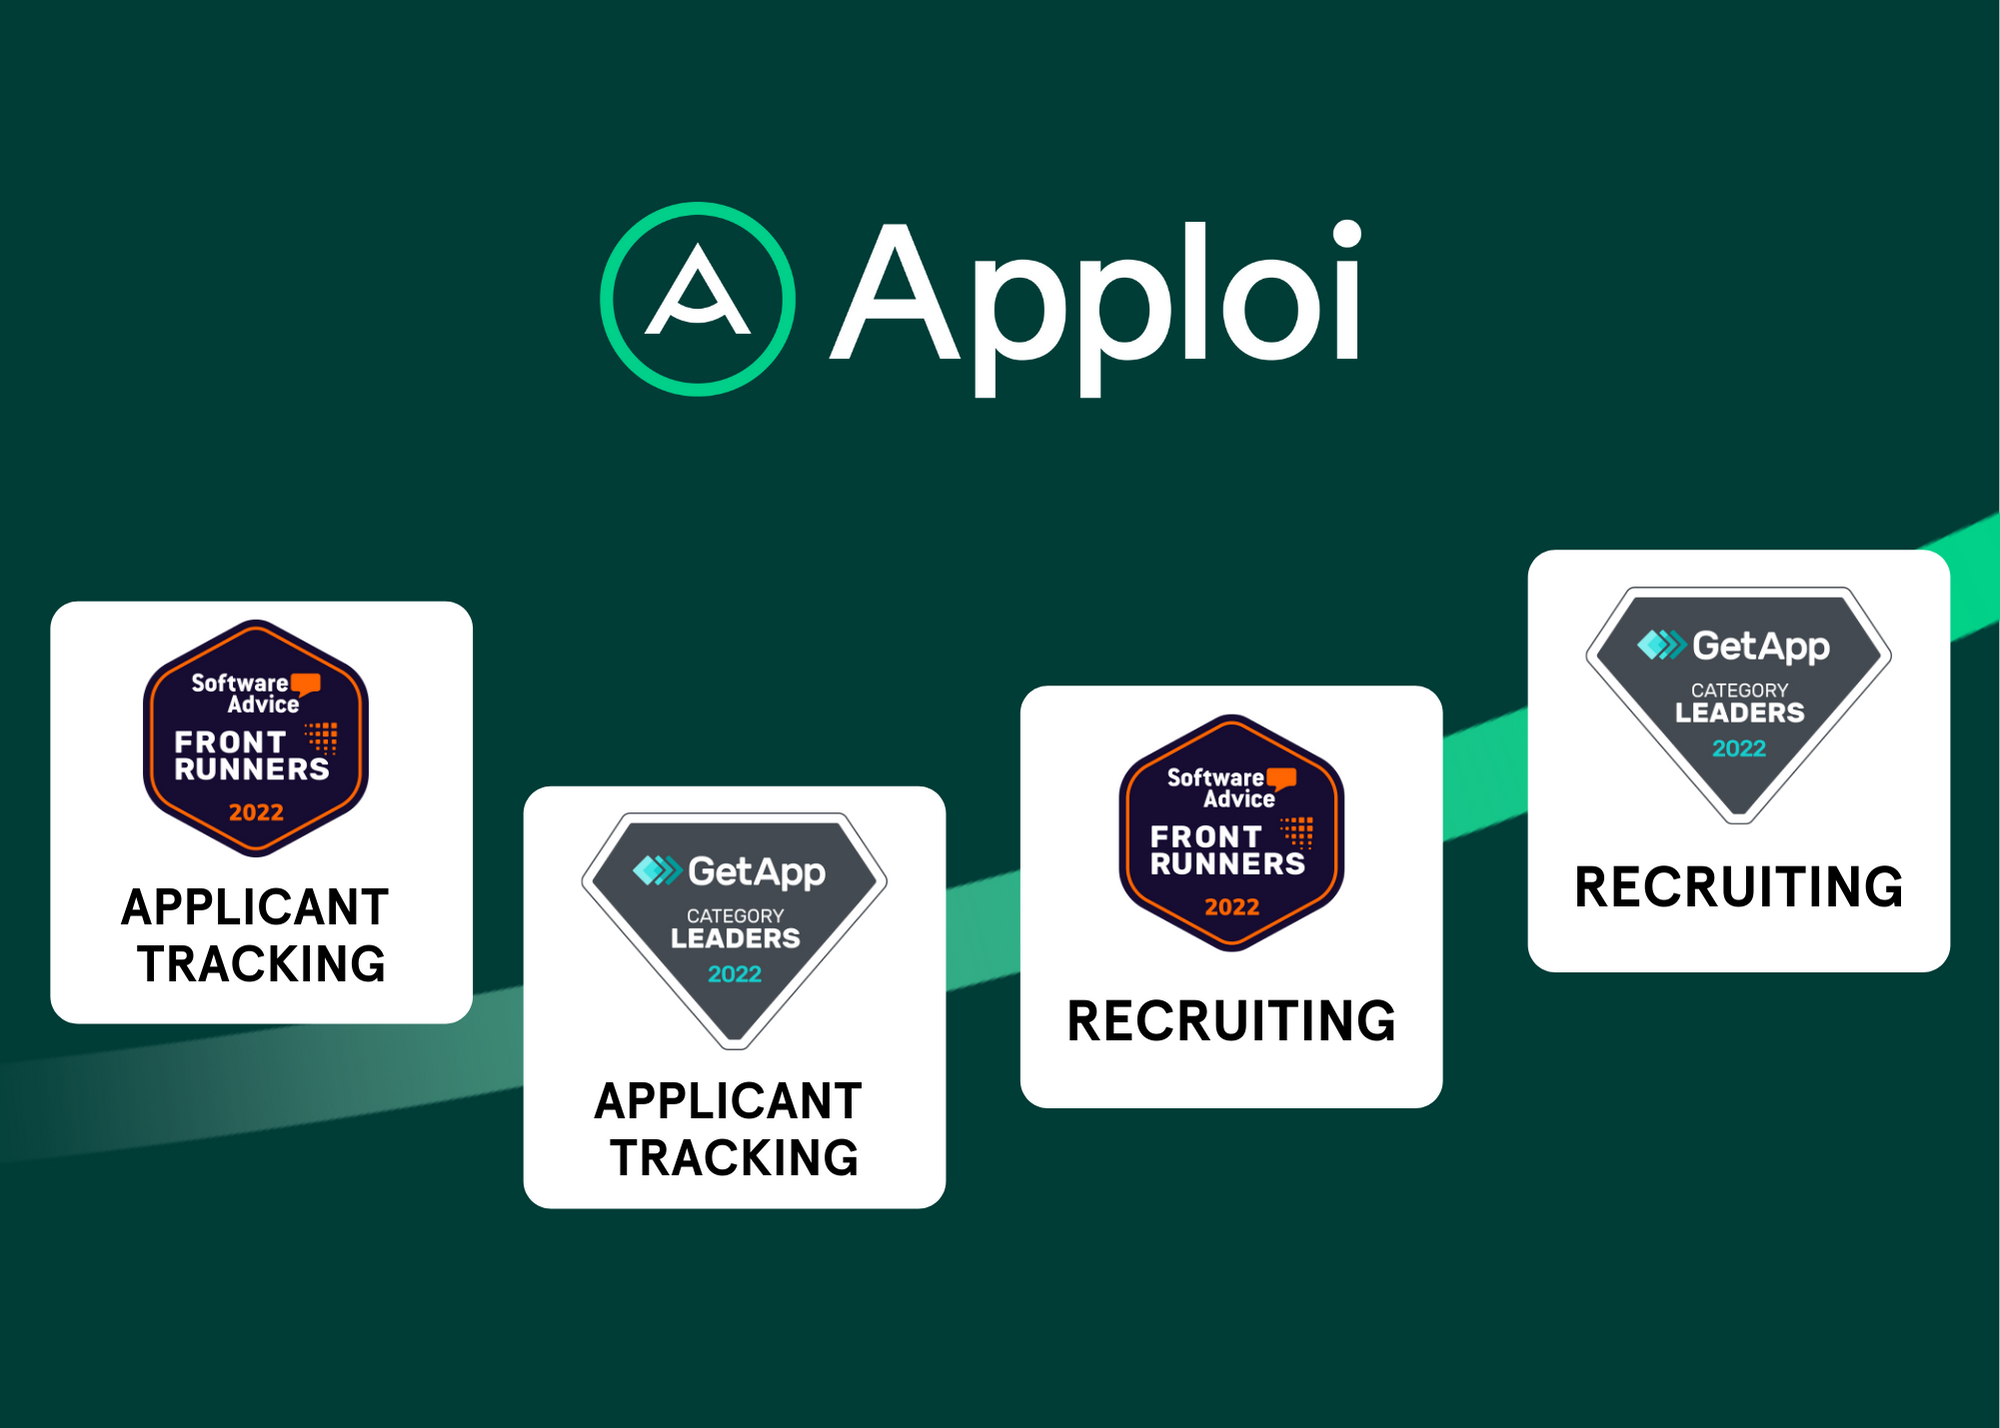 Apploi Named Category Leader For Recruiting Software By GetApp and Gartner Digital Markets